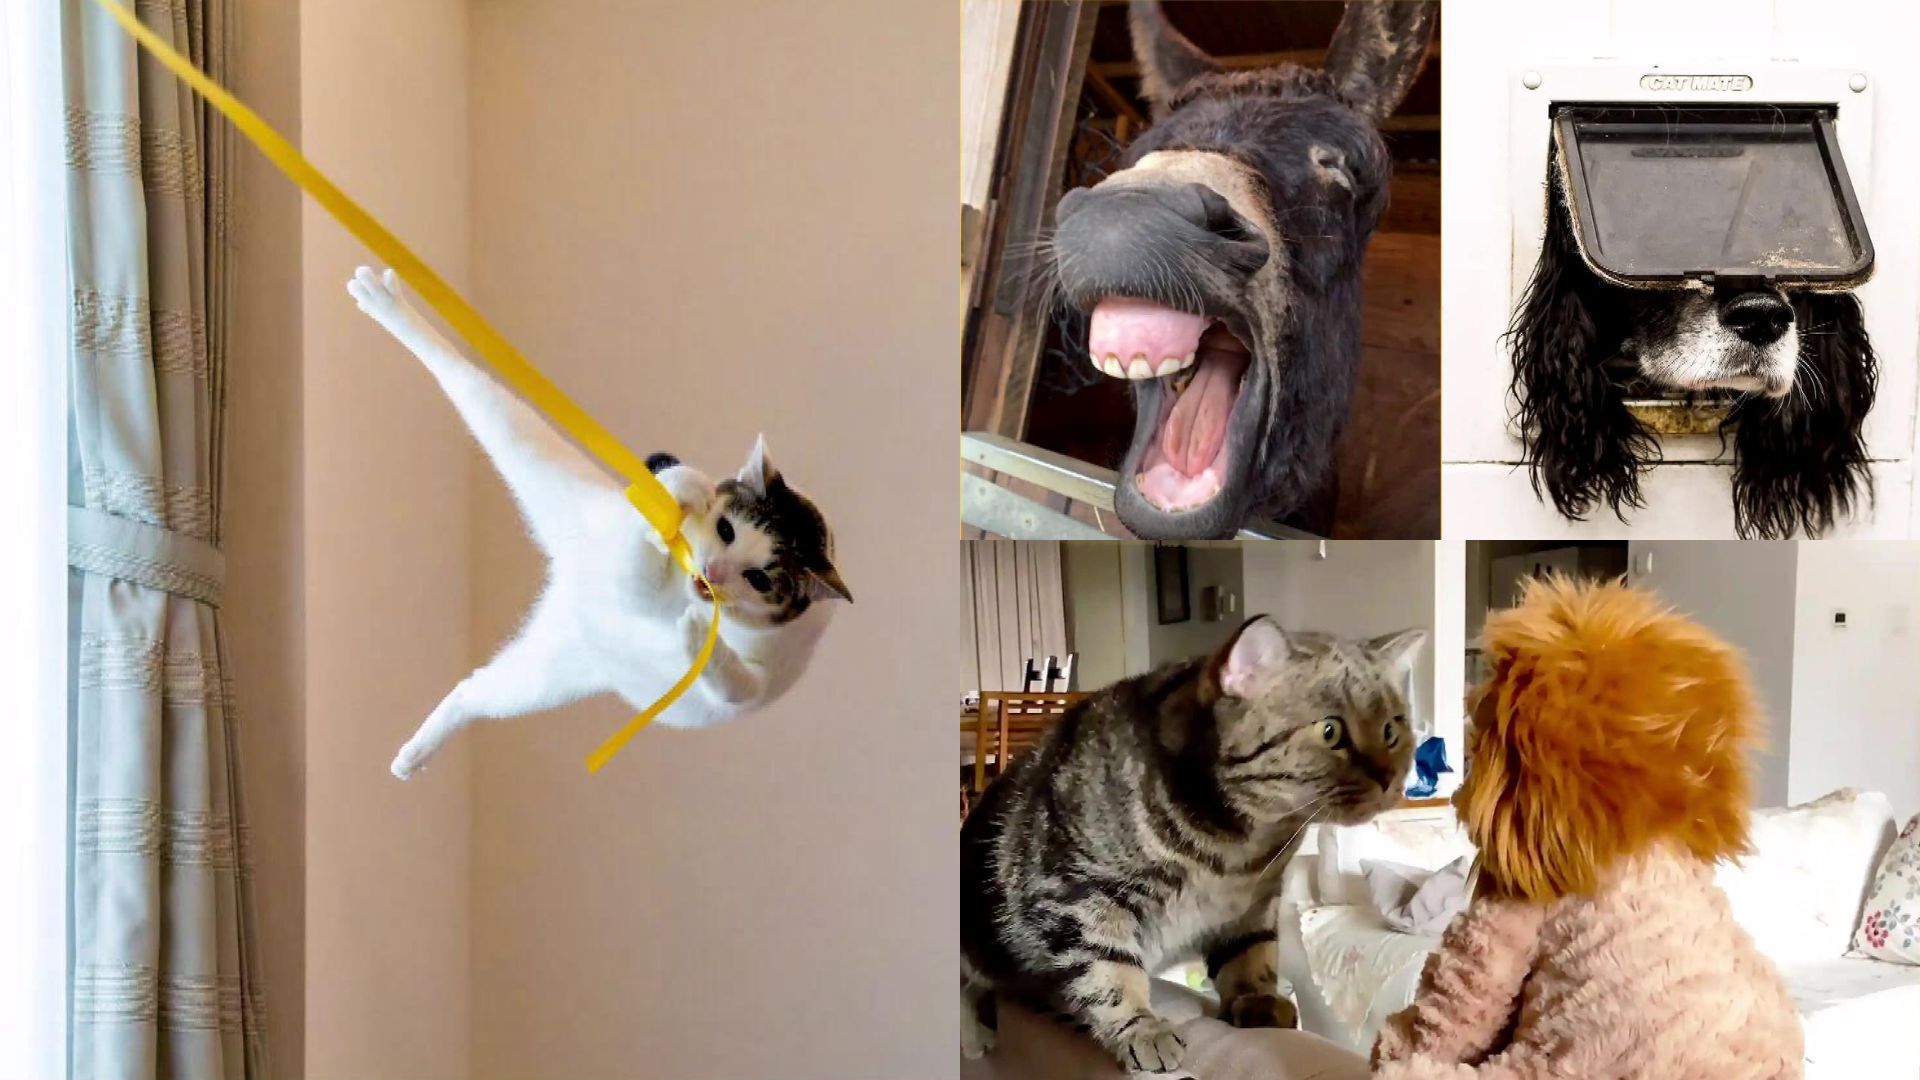 These pet photos are impossible not to laugh at